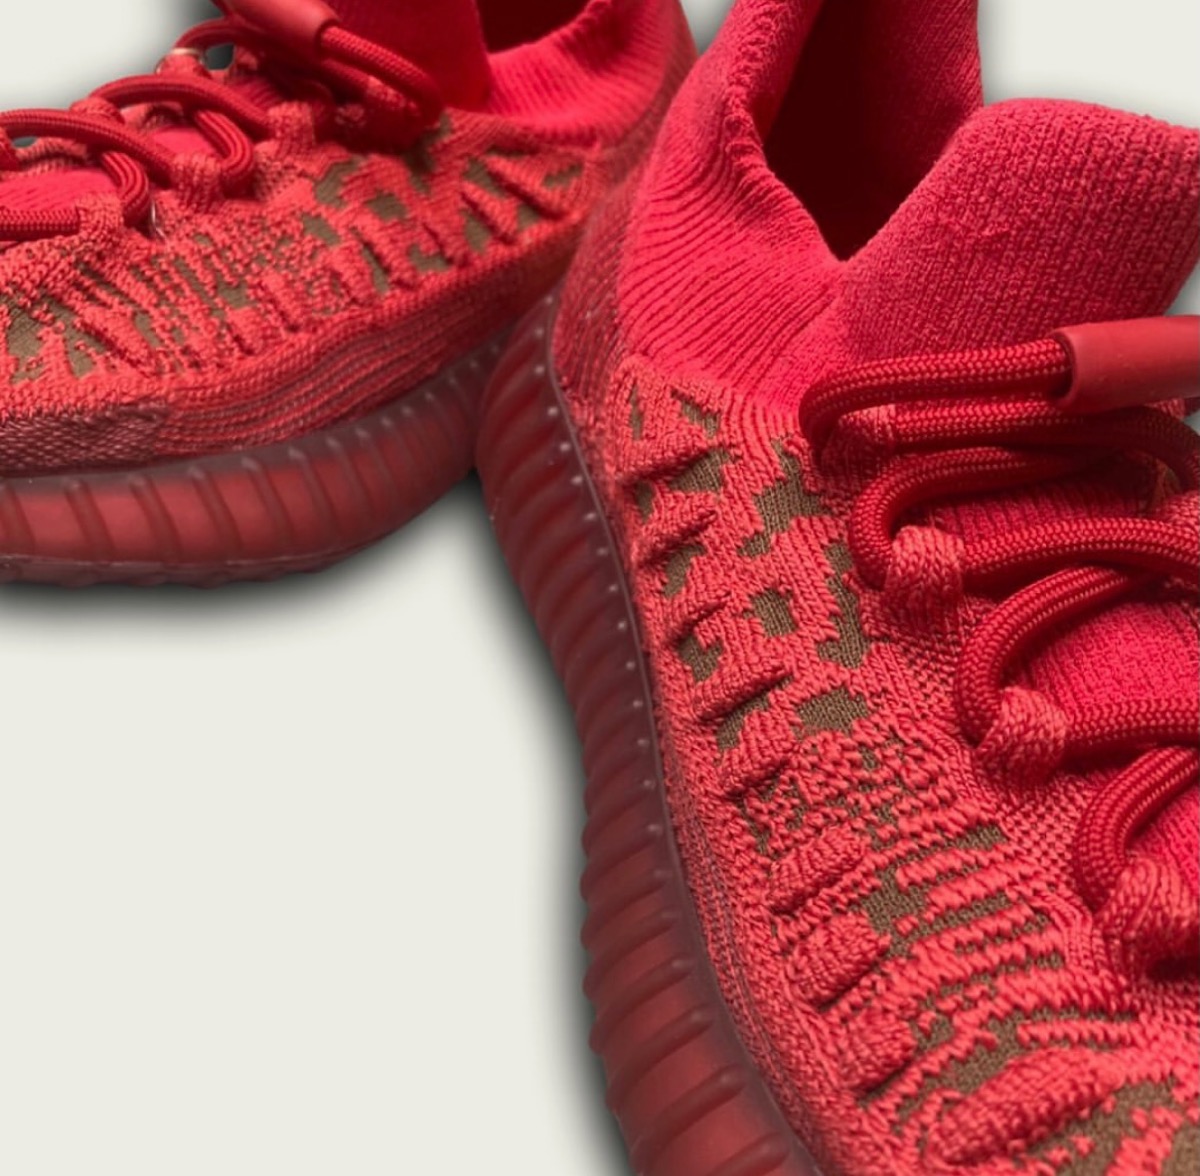 adidas YEEZY BOOST 350 V2 CMPCT “SLATE RED”が国内2月17日に発売予定 UP TO DATE